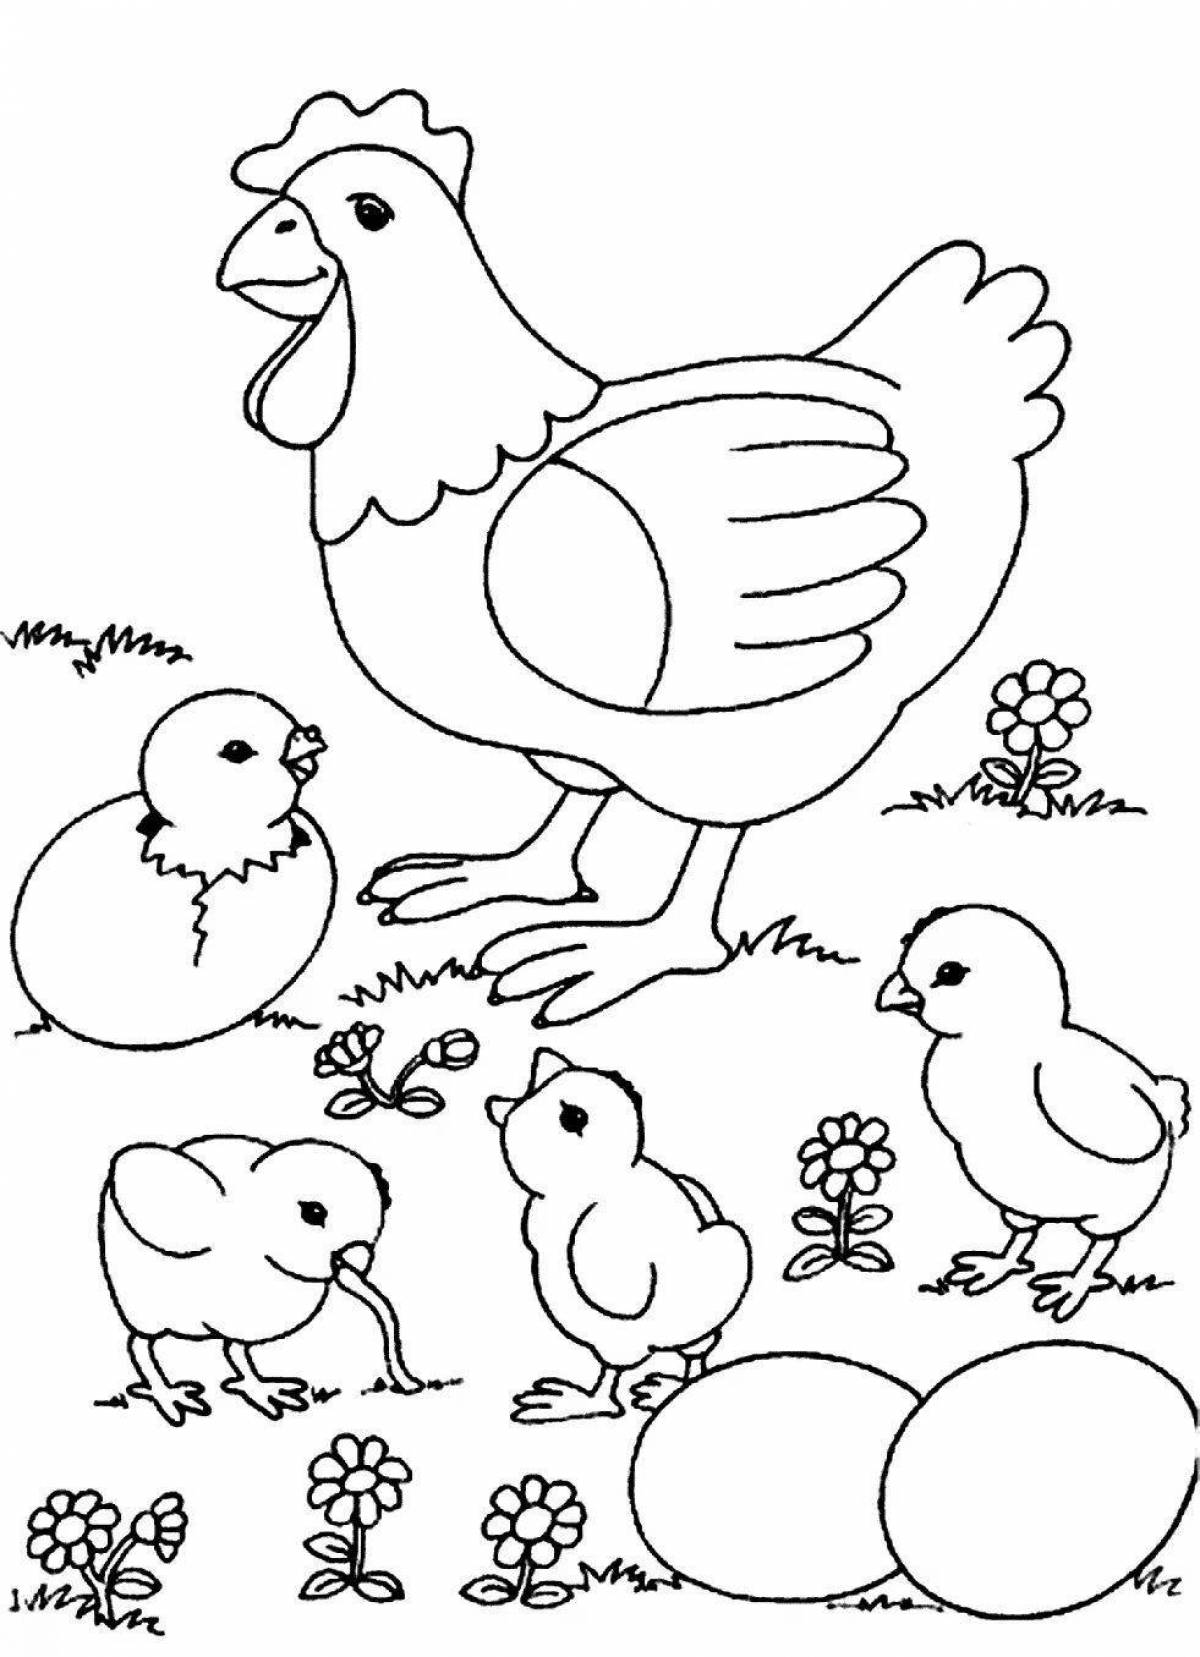 A wonderful homemade coloring book for 5-6 year olds